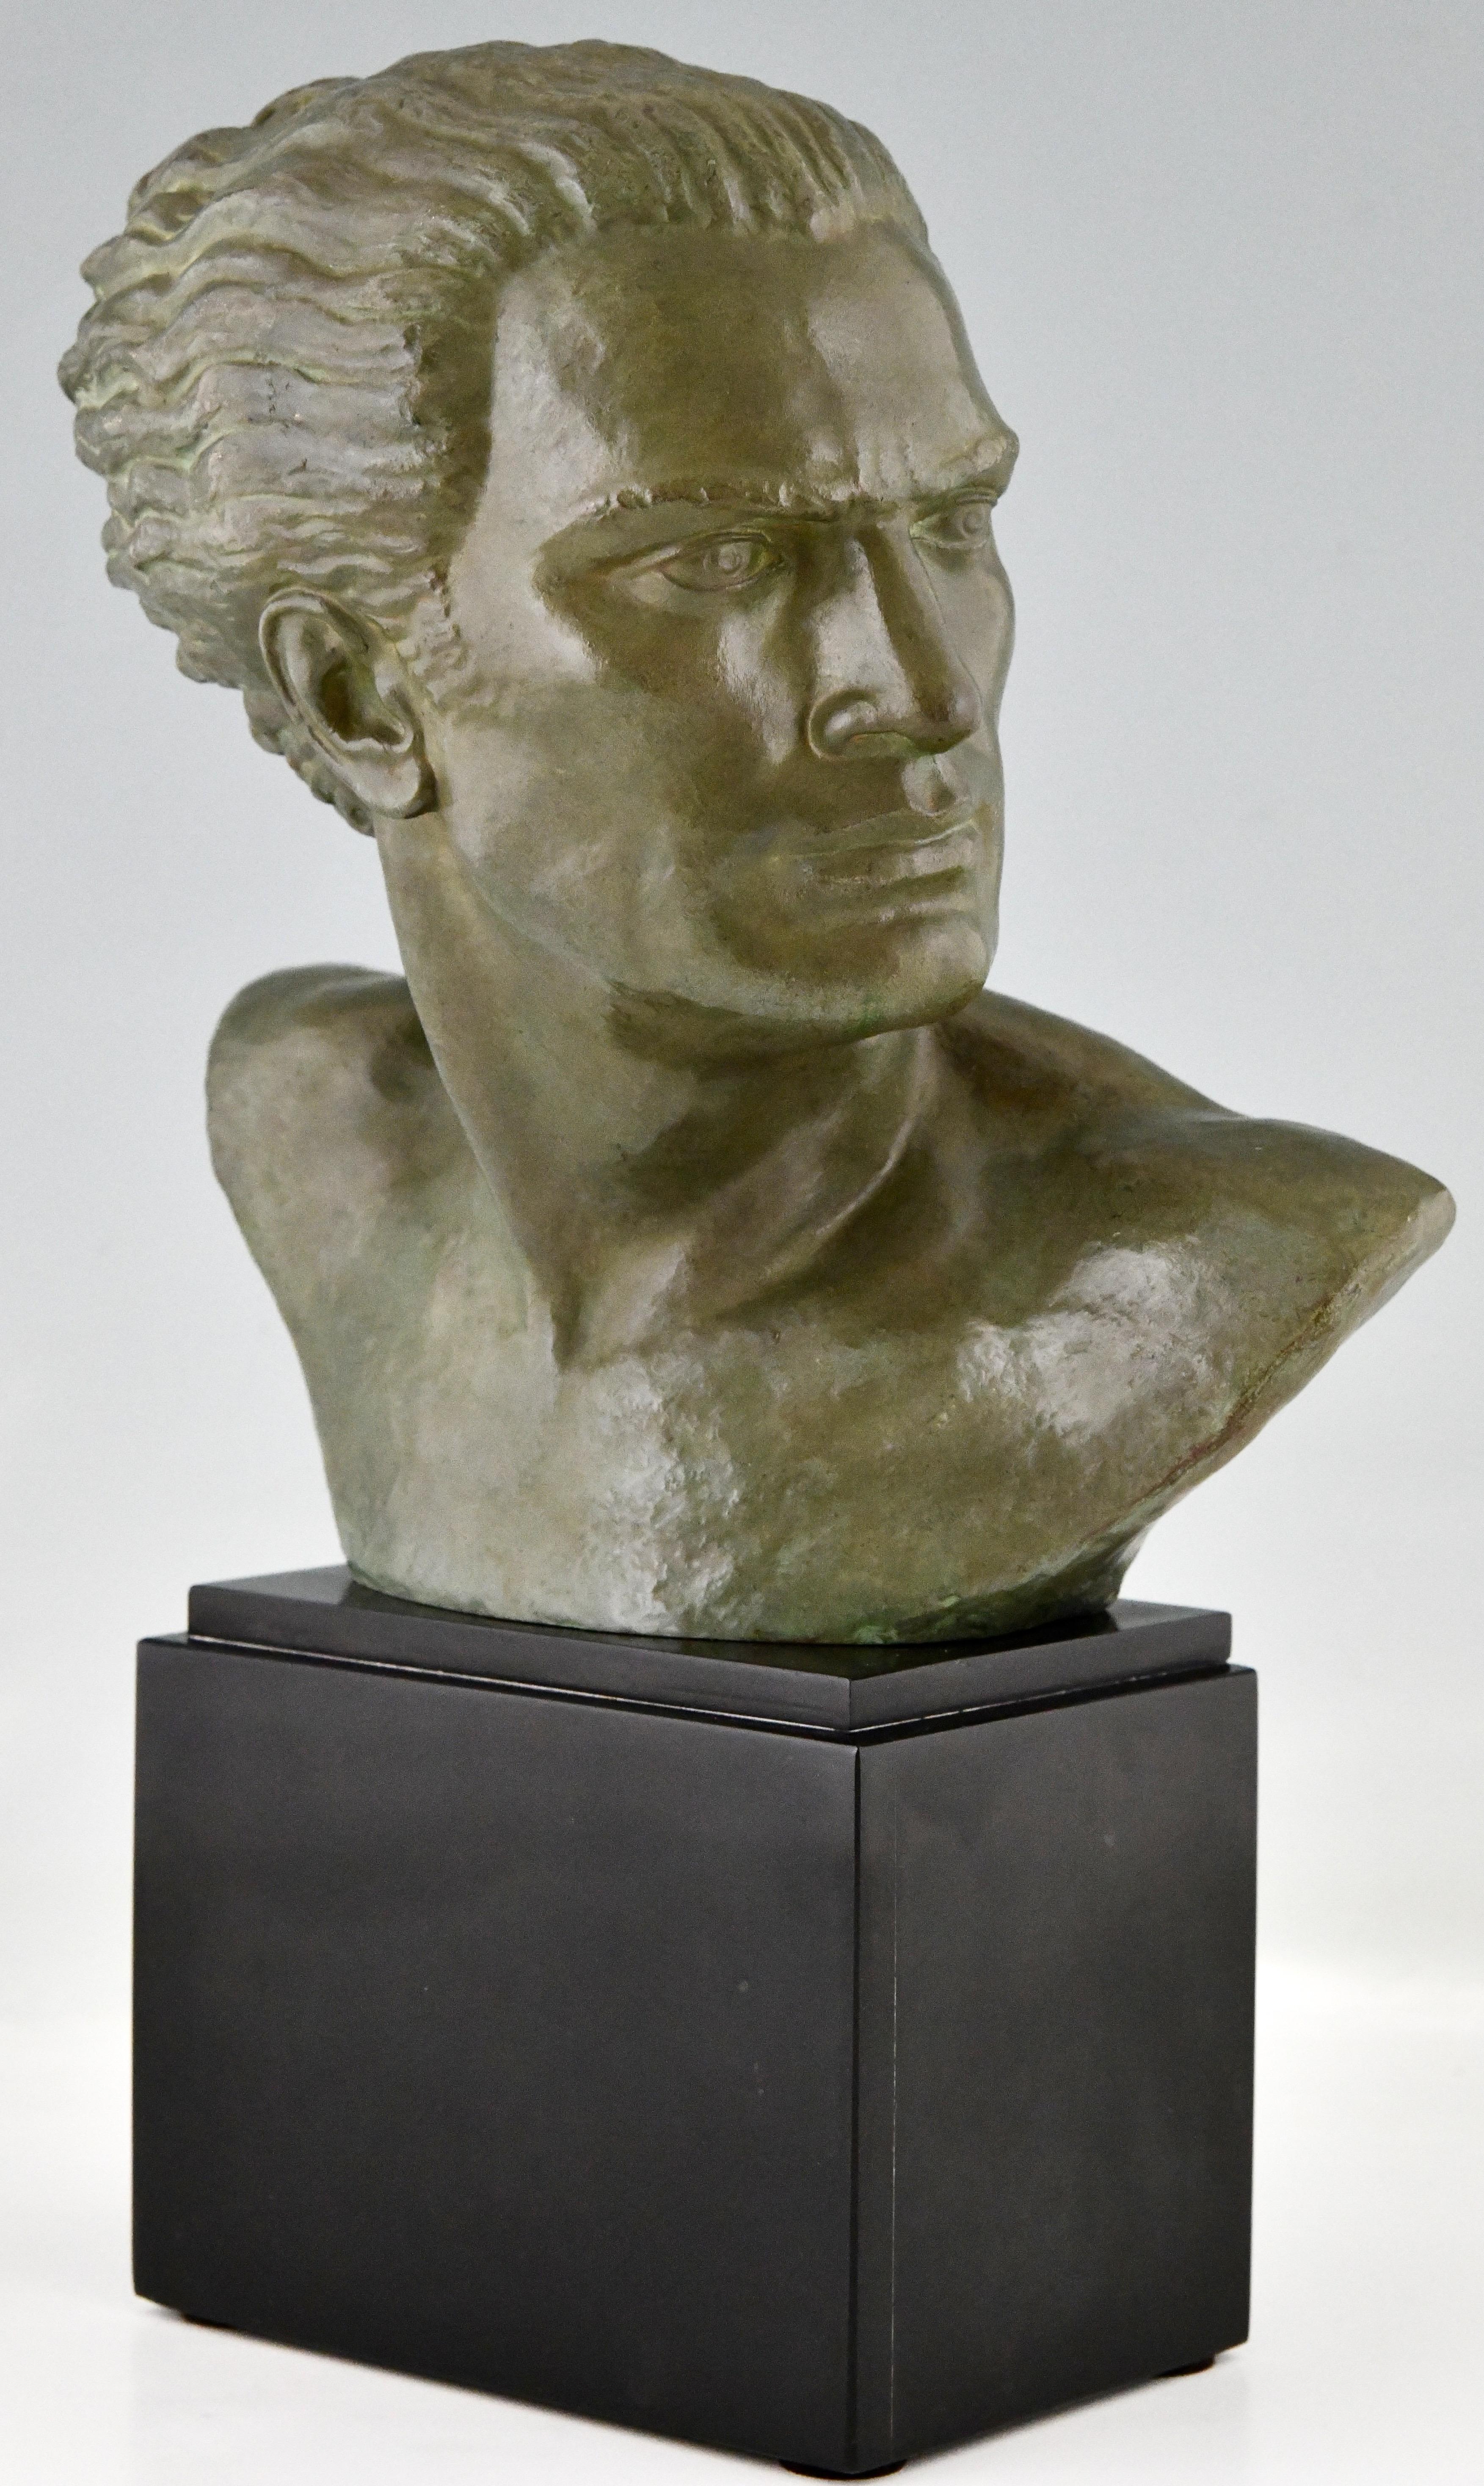 French Art Deco Bronze Sculpture Male Bust Aviator Jean Mermoz by Alfred Gilbert, 1925